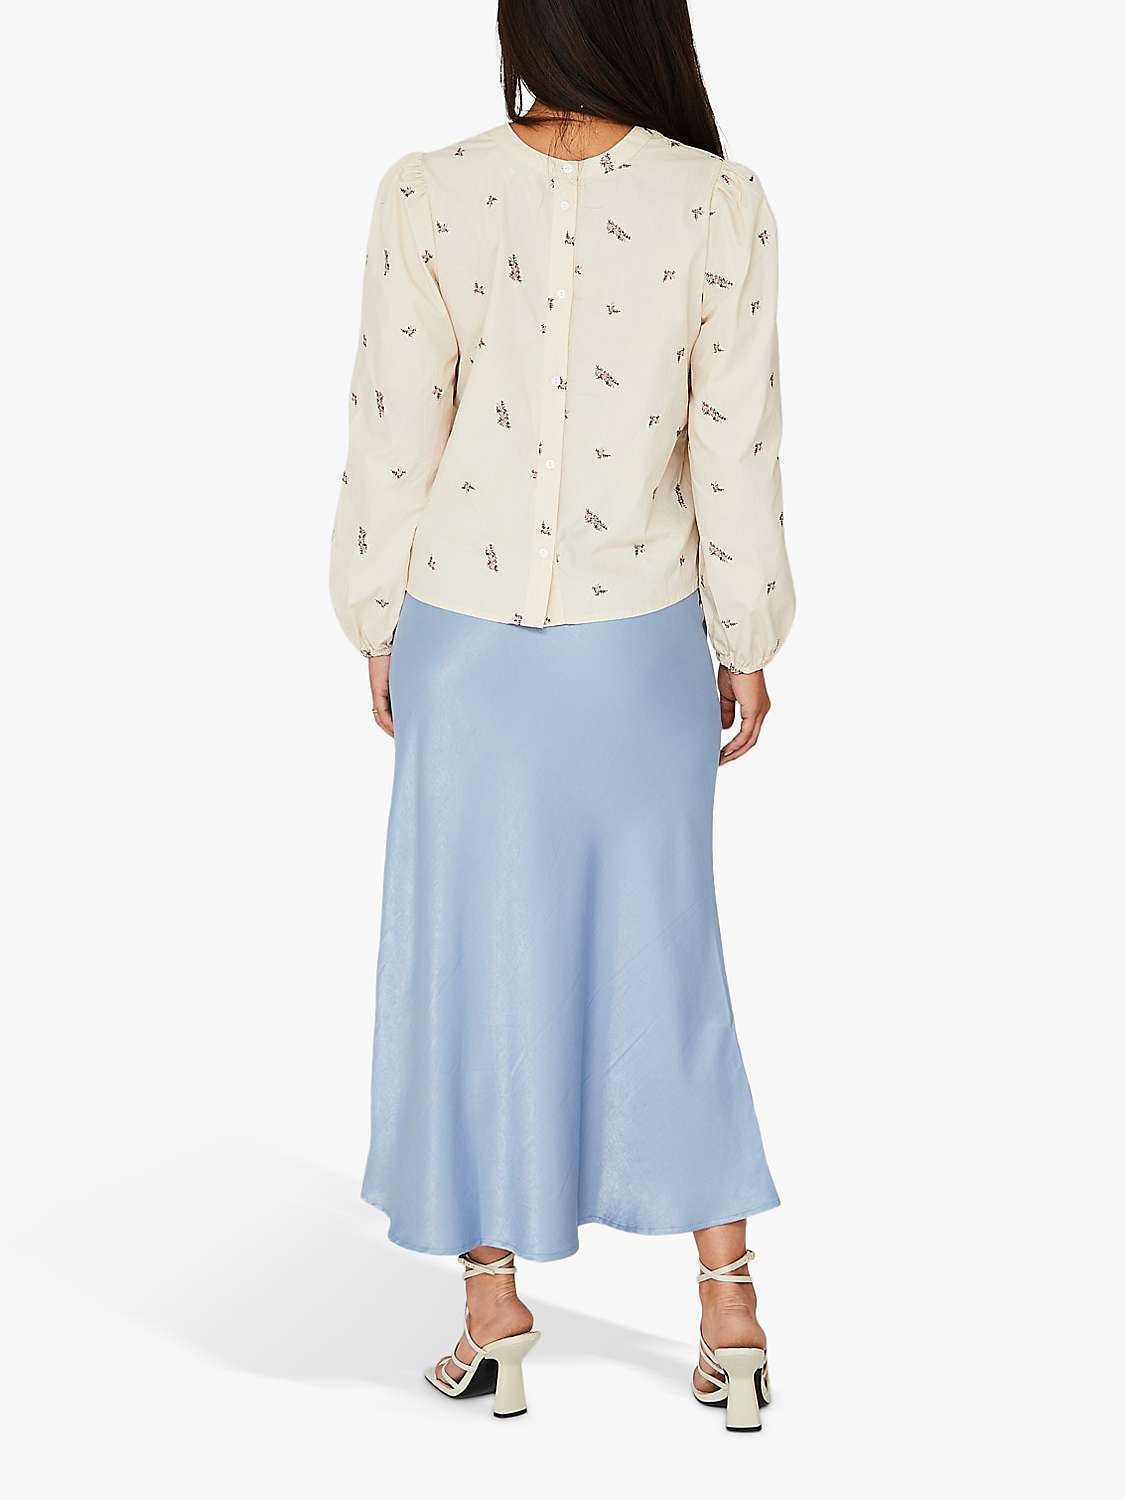 Buy A-VIEW Carry Maxi Sateen Skirt, Blue Online at johnlewis.com